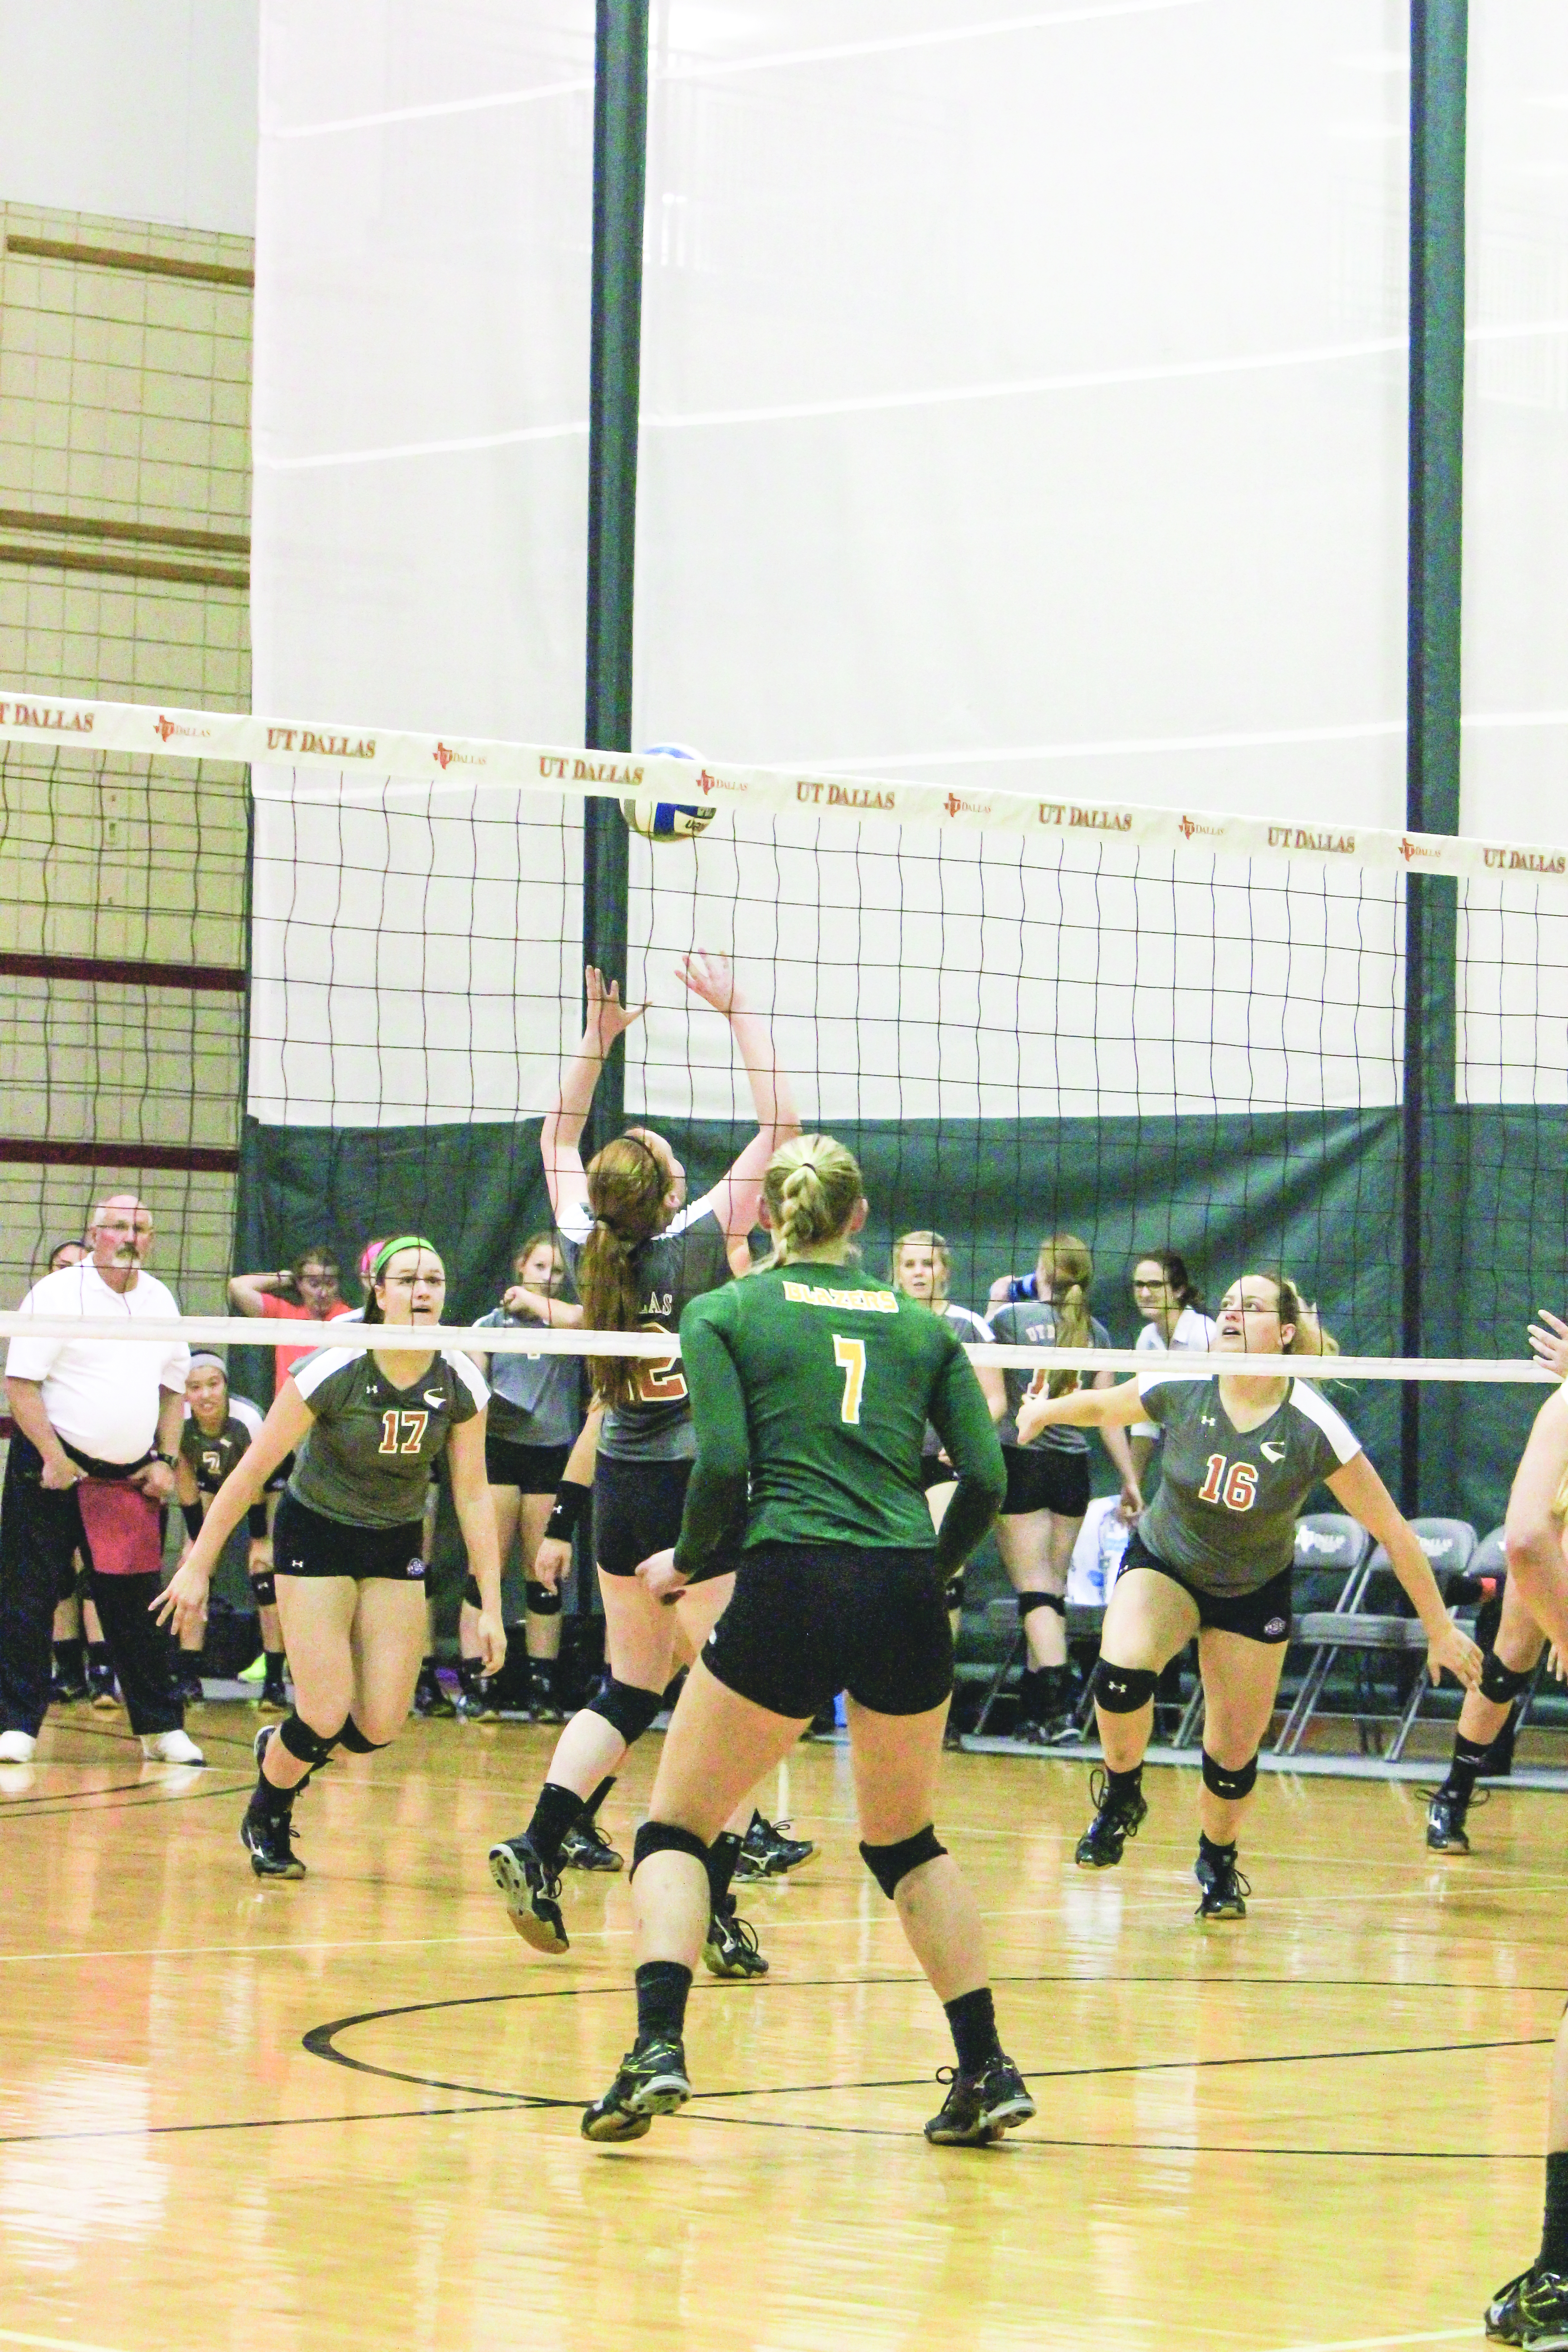 Fall Playoff Preview: Volleyball